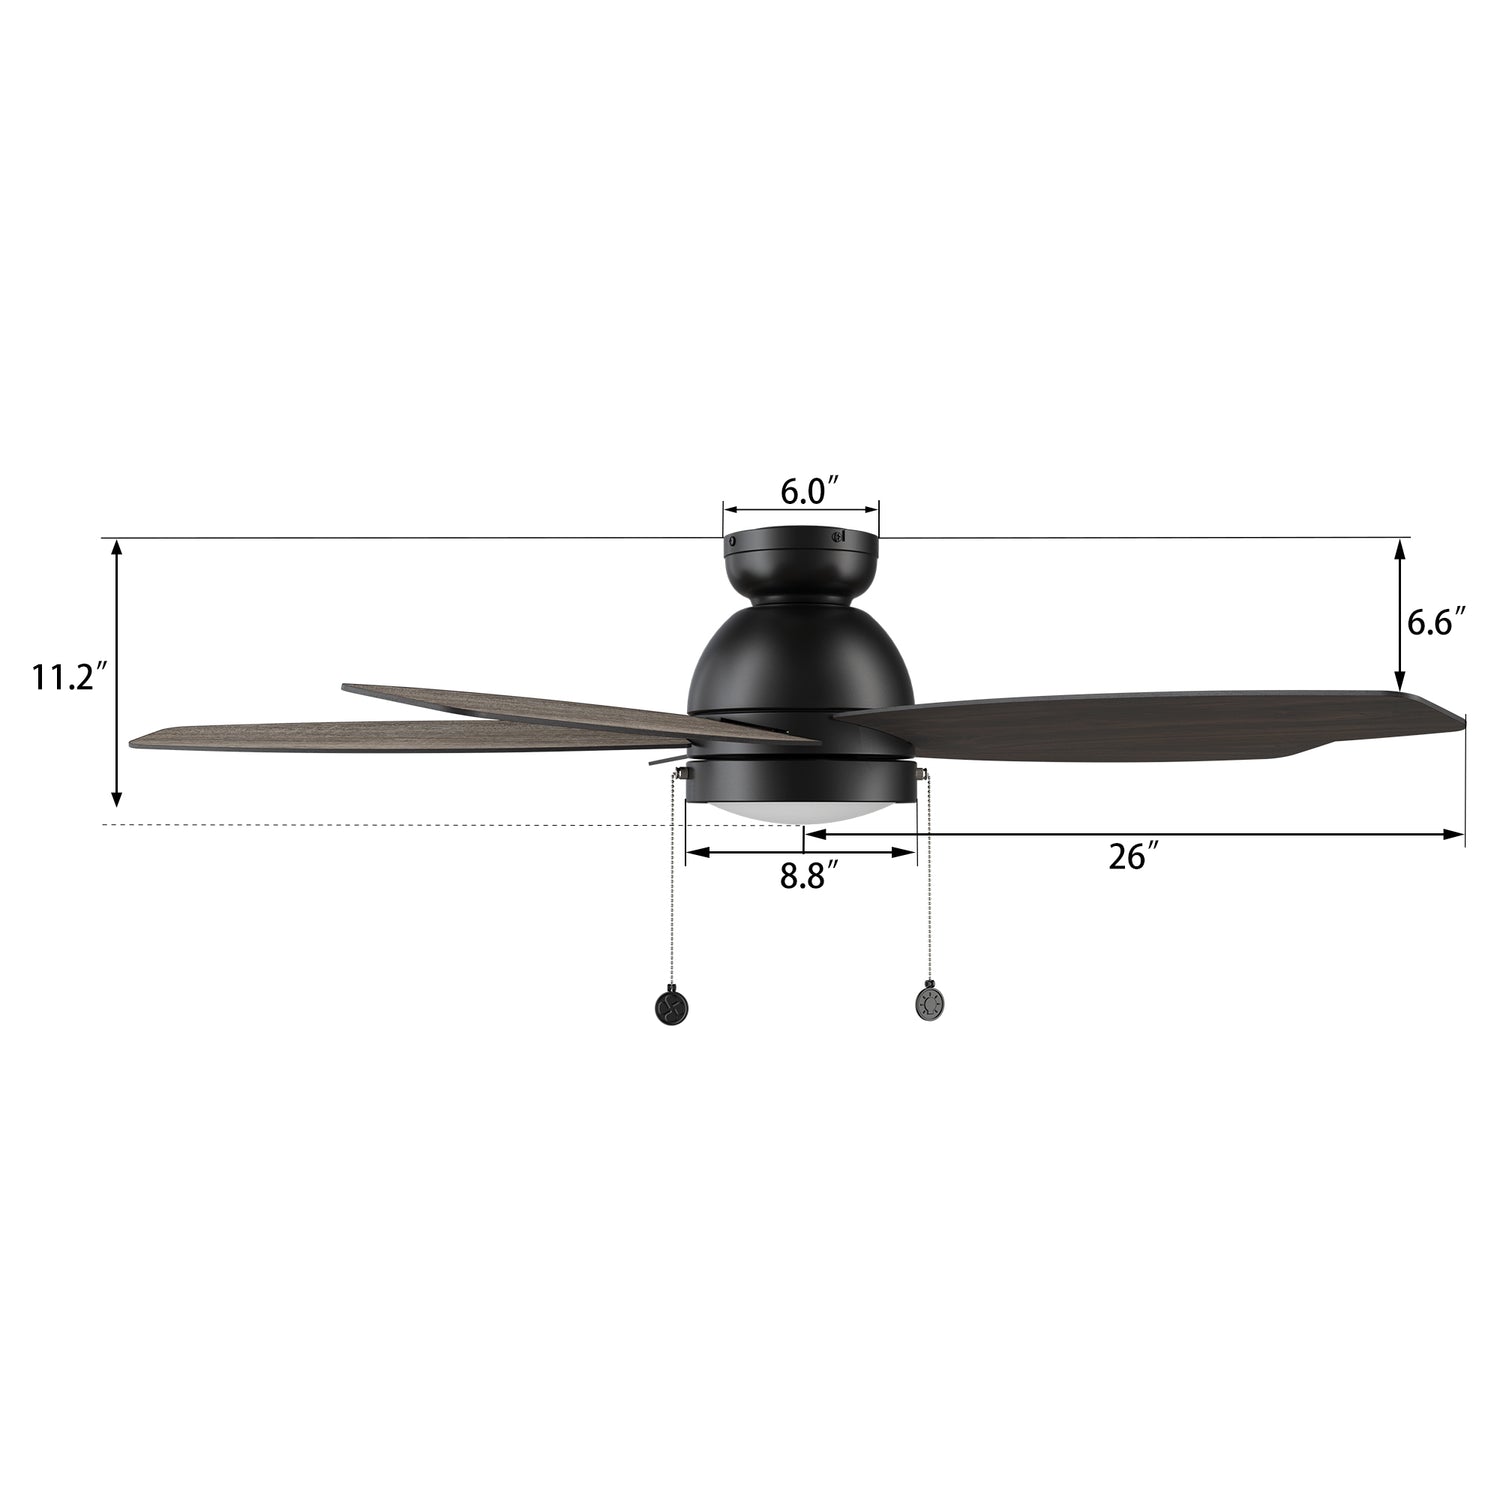 Detail size of Carro flush mount Treyton 52 inch pull chain ceiling fan with light, indoor use only. 